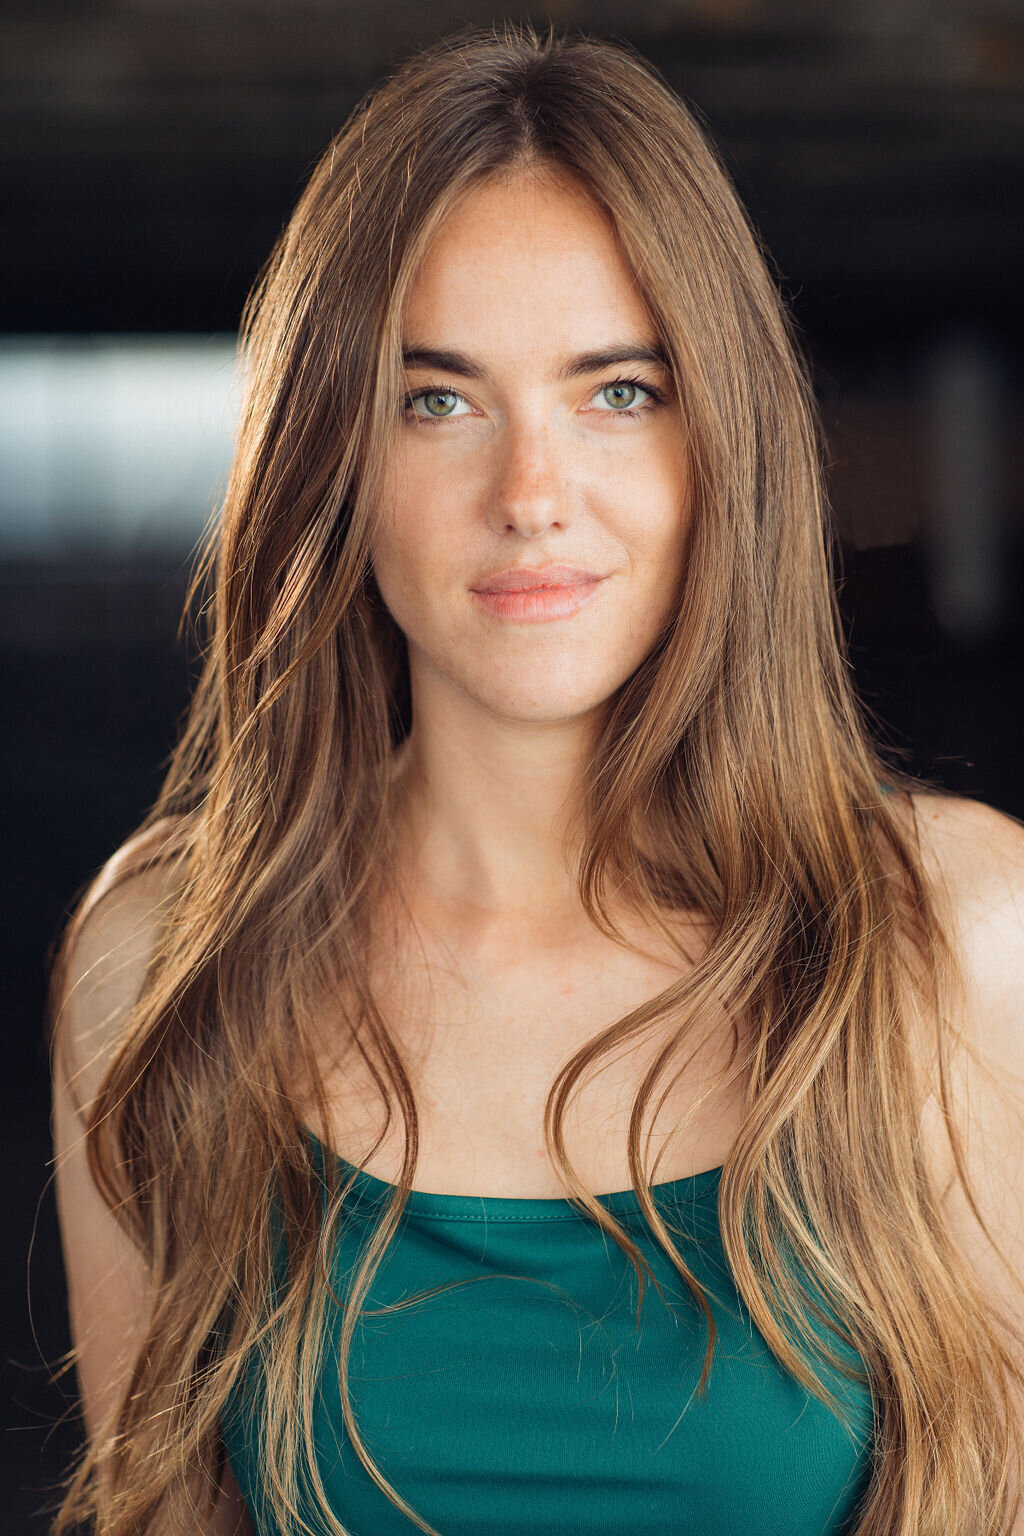 Headshot Photograph Of Young Woman In Blue Green Tank Top Los Angeles